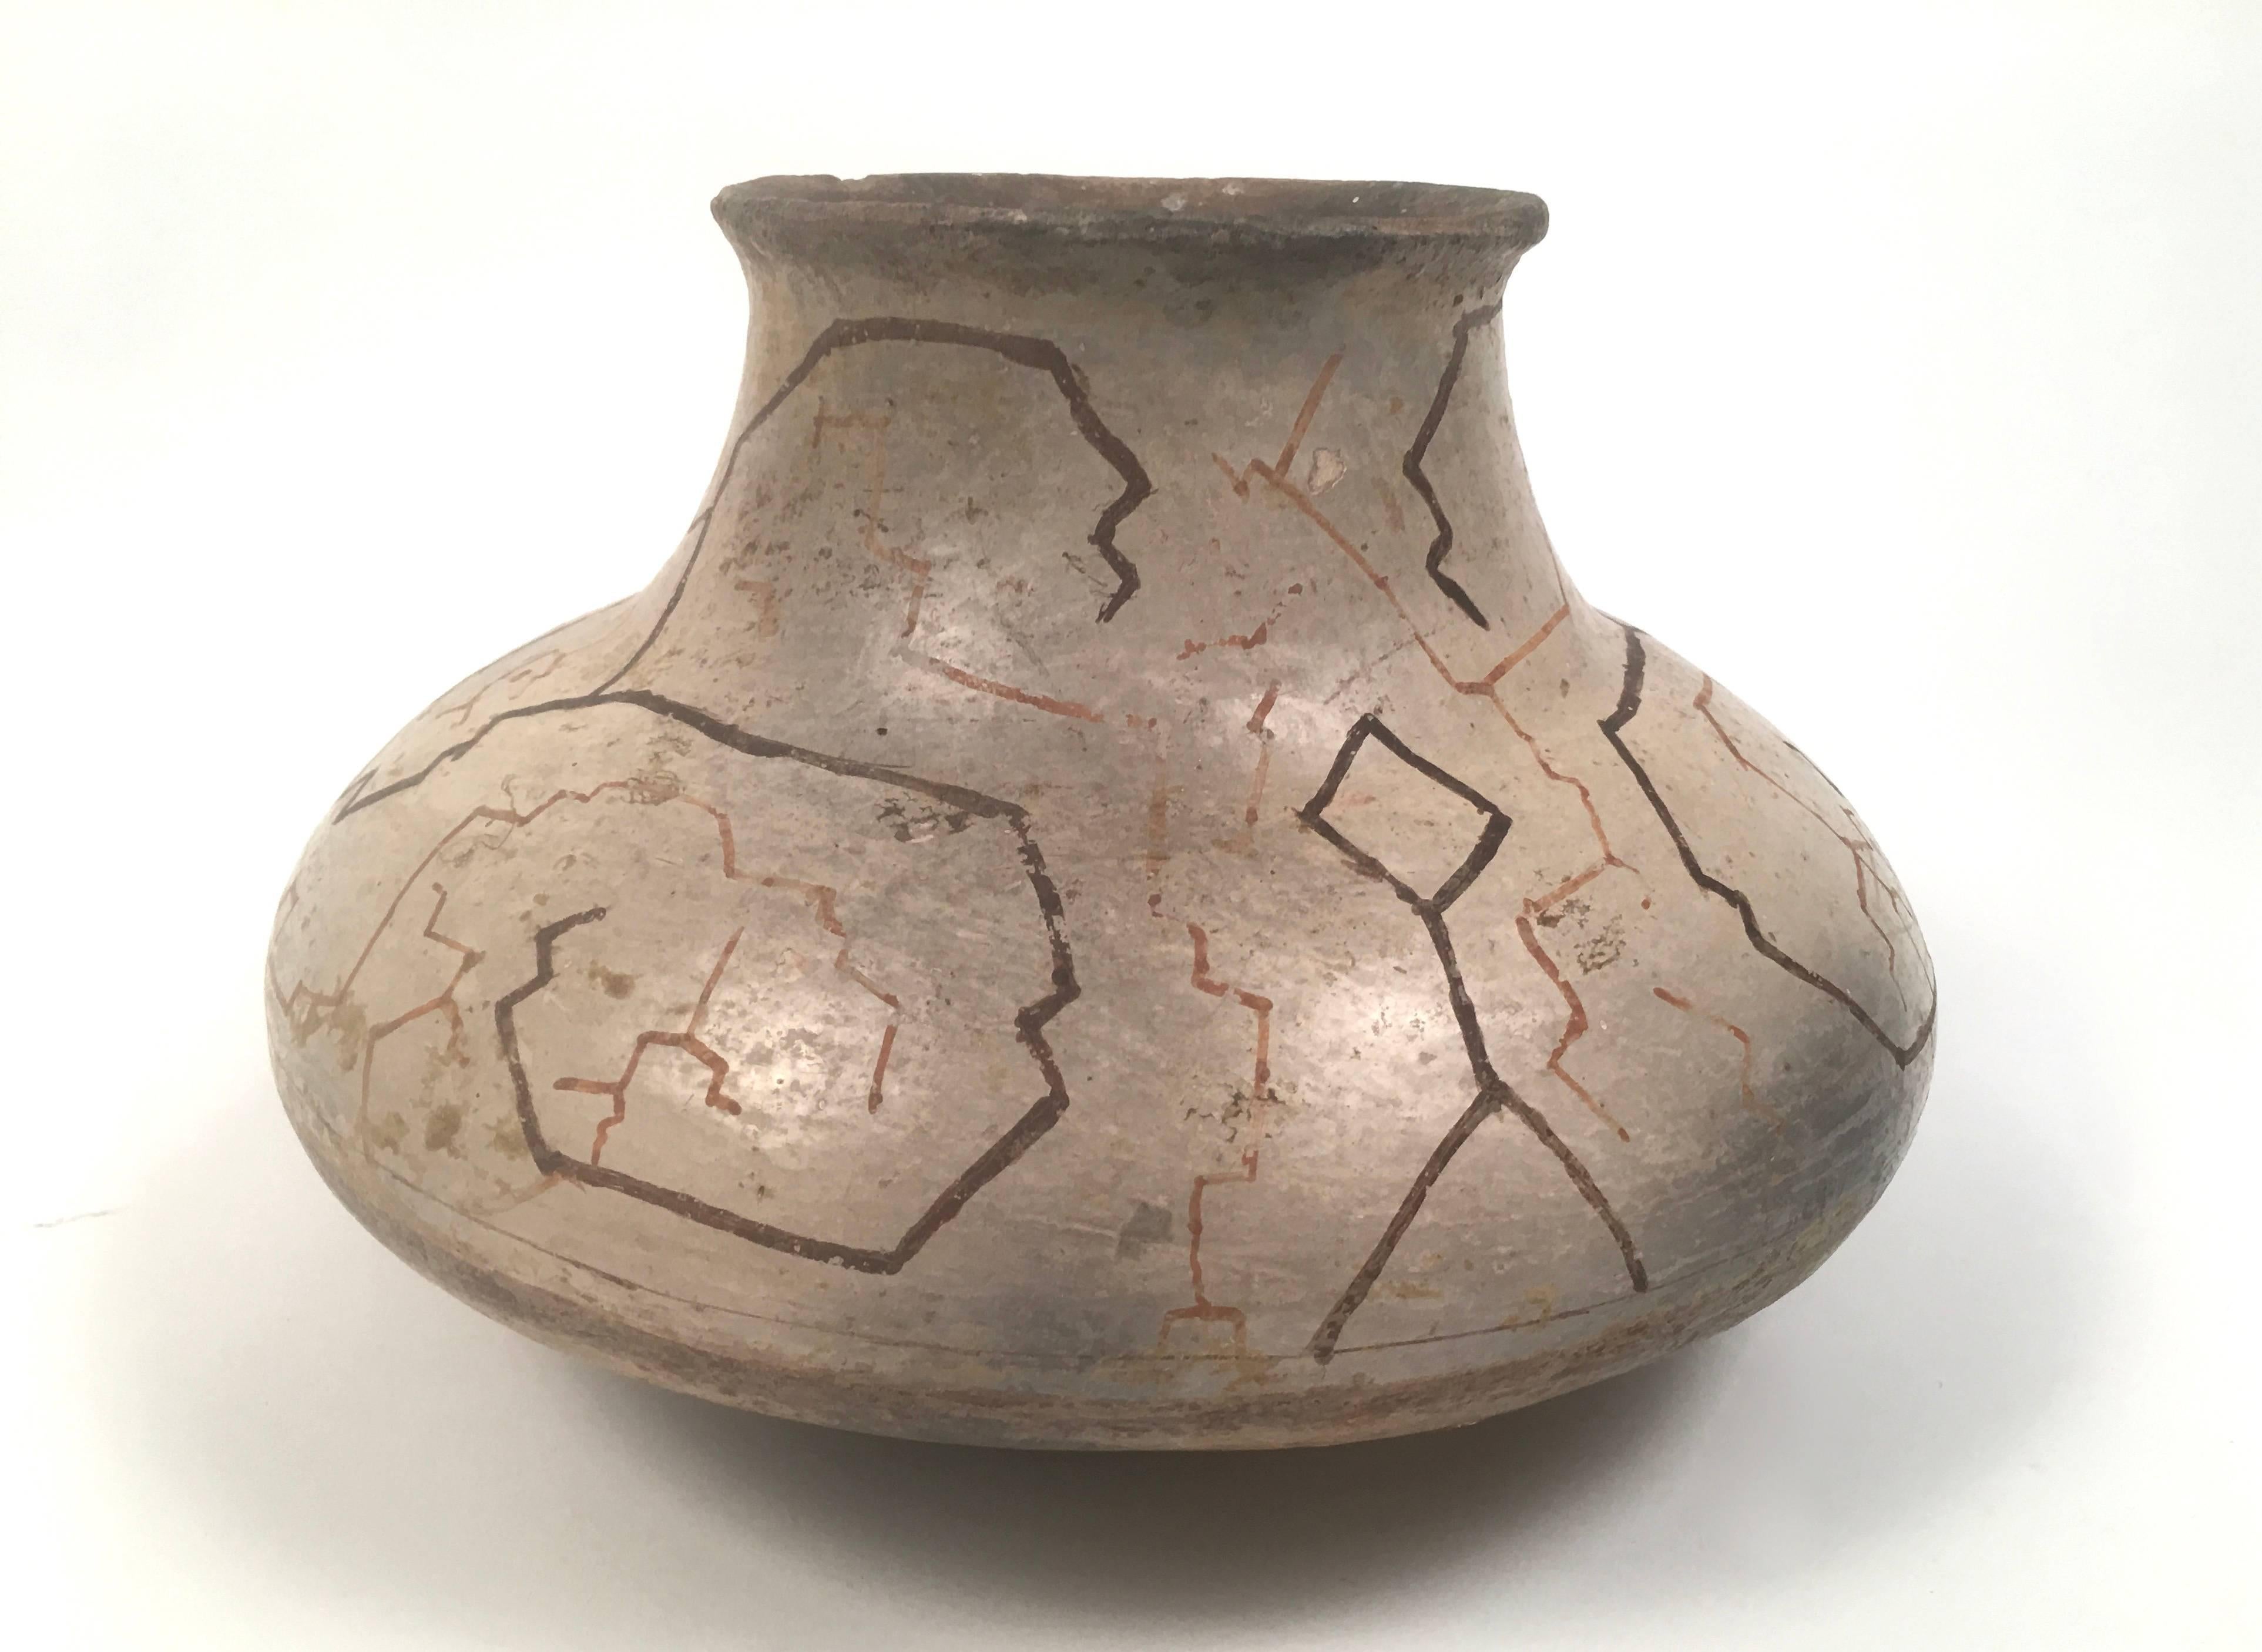 A hand painted pottery vase by the Shipibo people of Peru, circa 1900, in earthenware with hand painted geometric designs, using natural pigments, which represent constellations and various planets. Wonderful dry surface and patina. 
